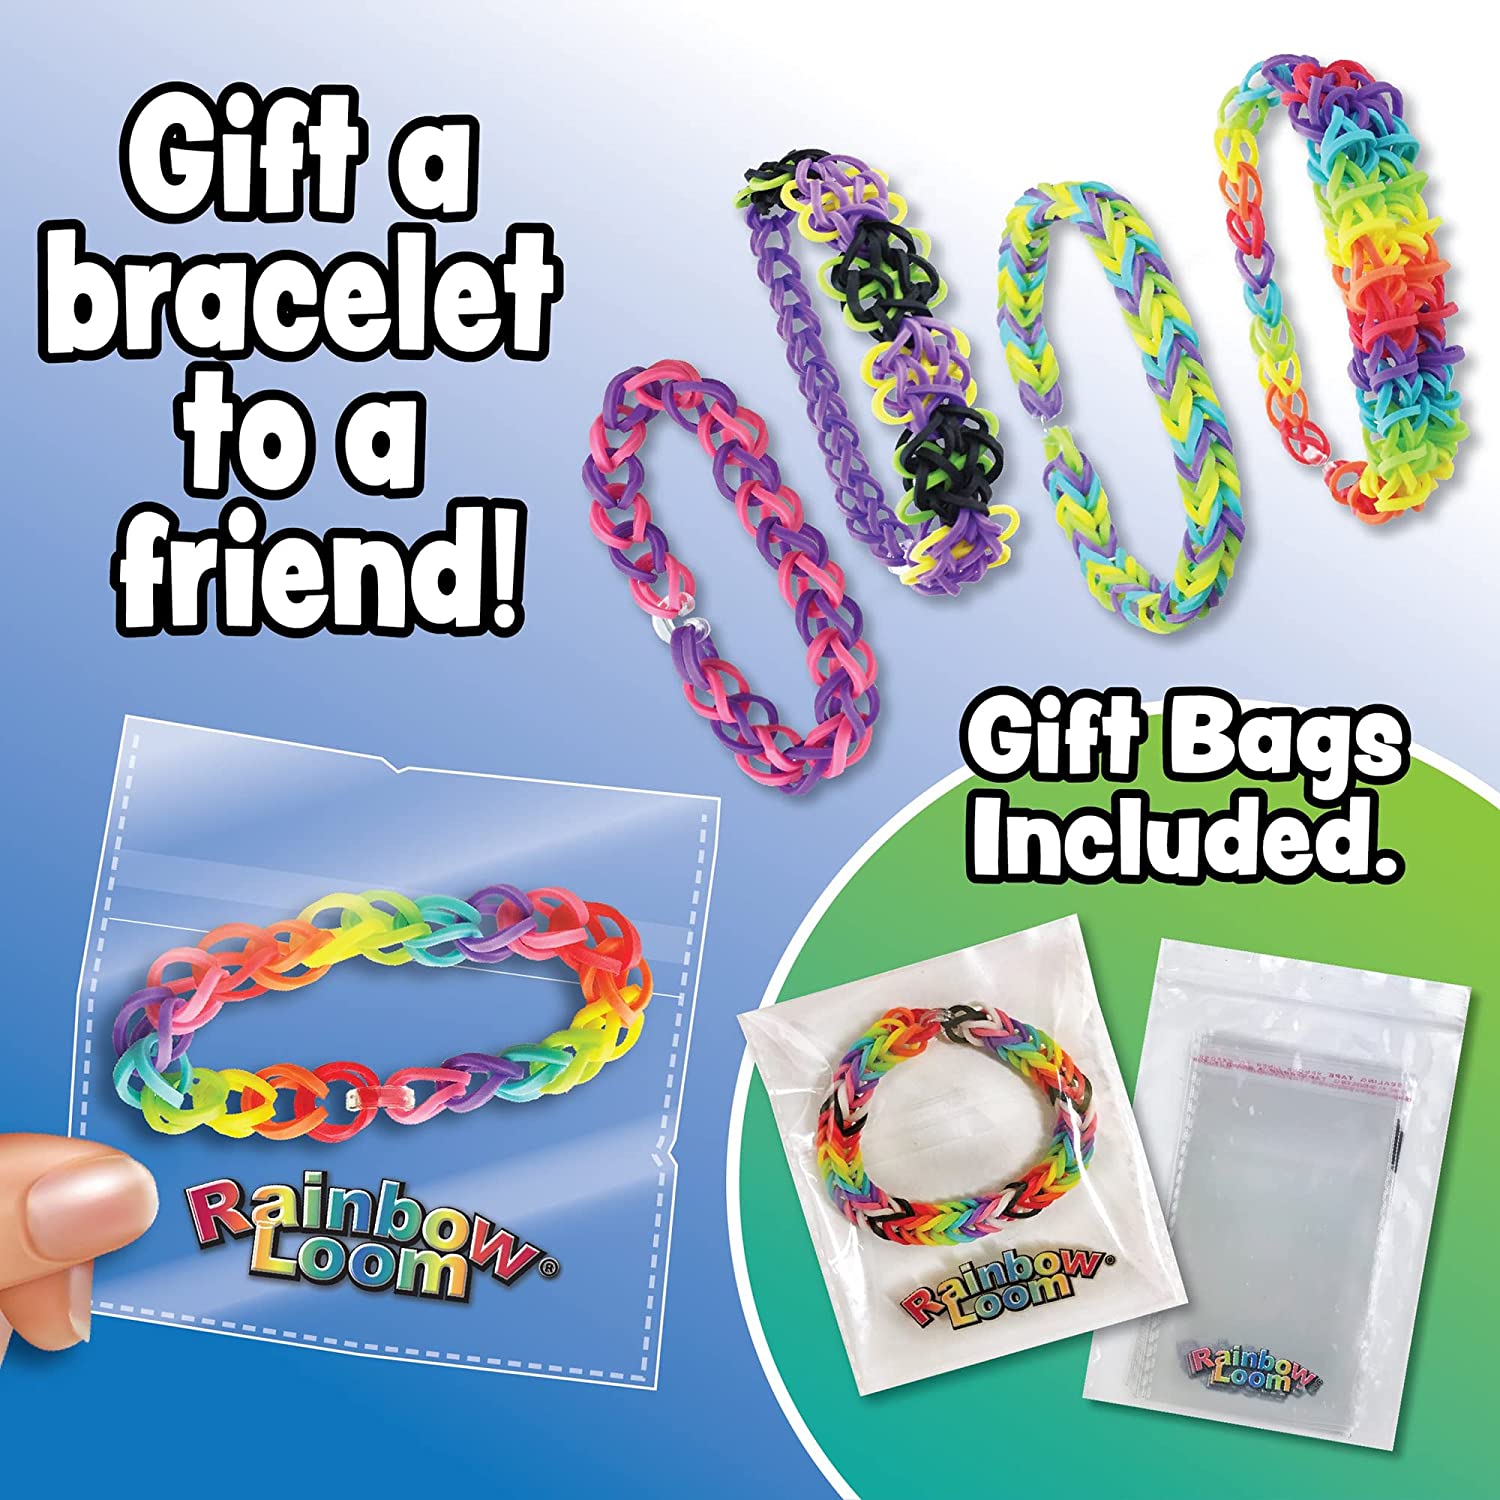 Buy Rainbow Loom bracelet rubber bands, Middle Ages collection